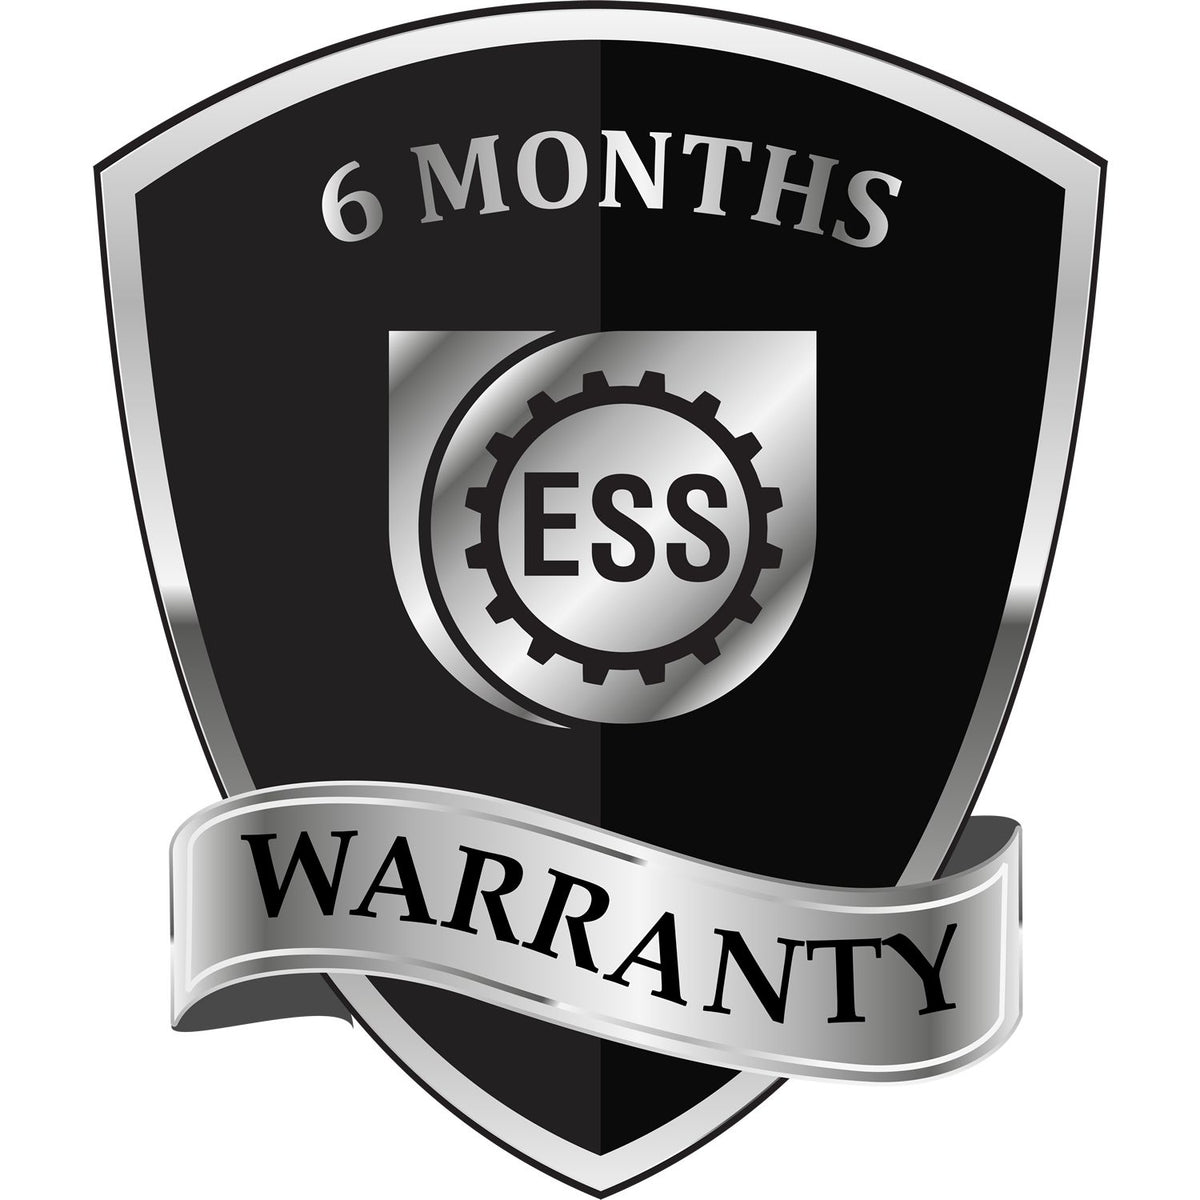 A black and silver badge or emblem showing warranty information for the South Dakota Professional Geologist Seal Stamp